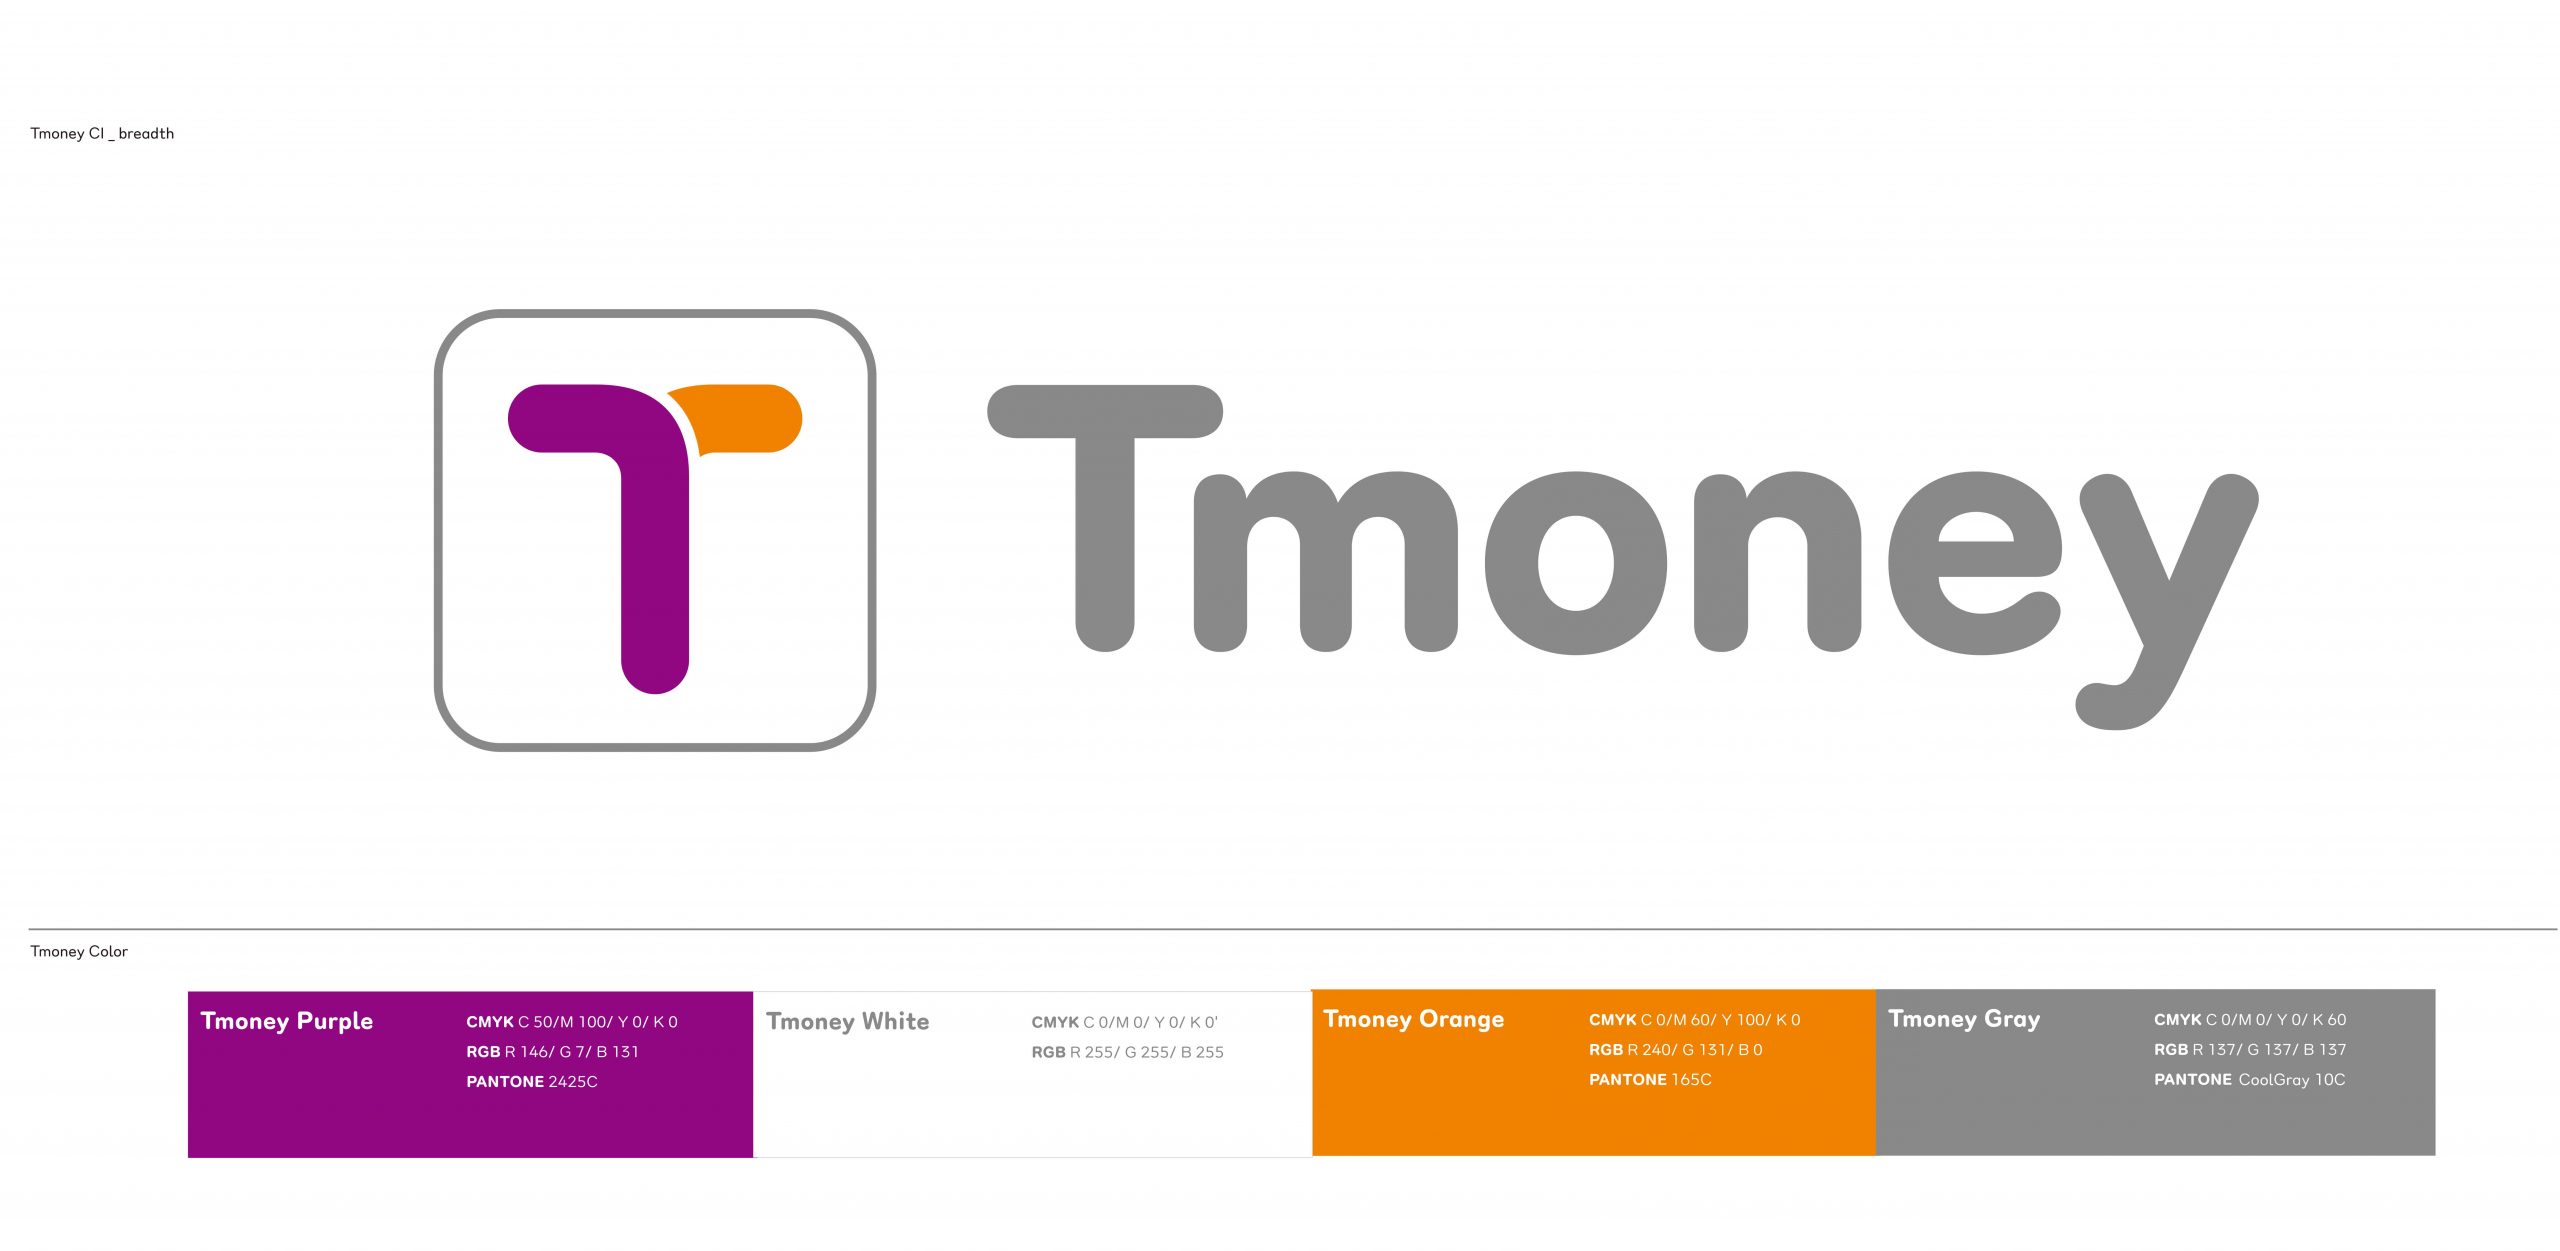 TMoney leads the way in tech innovation